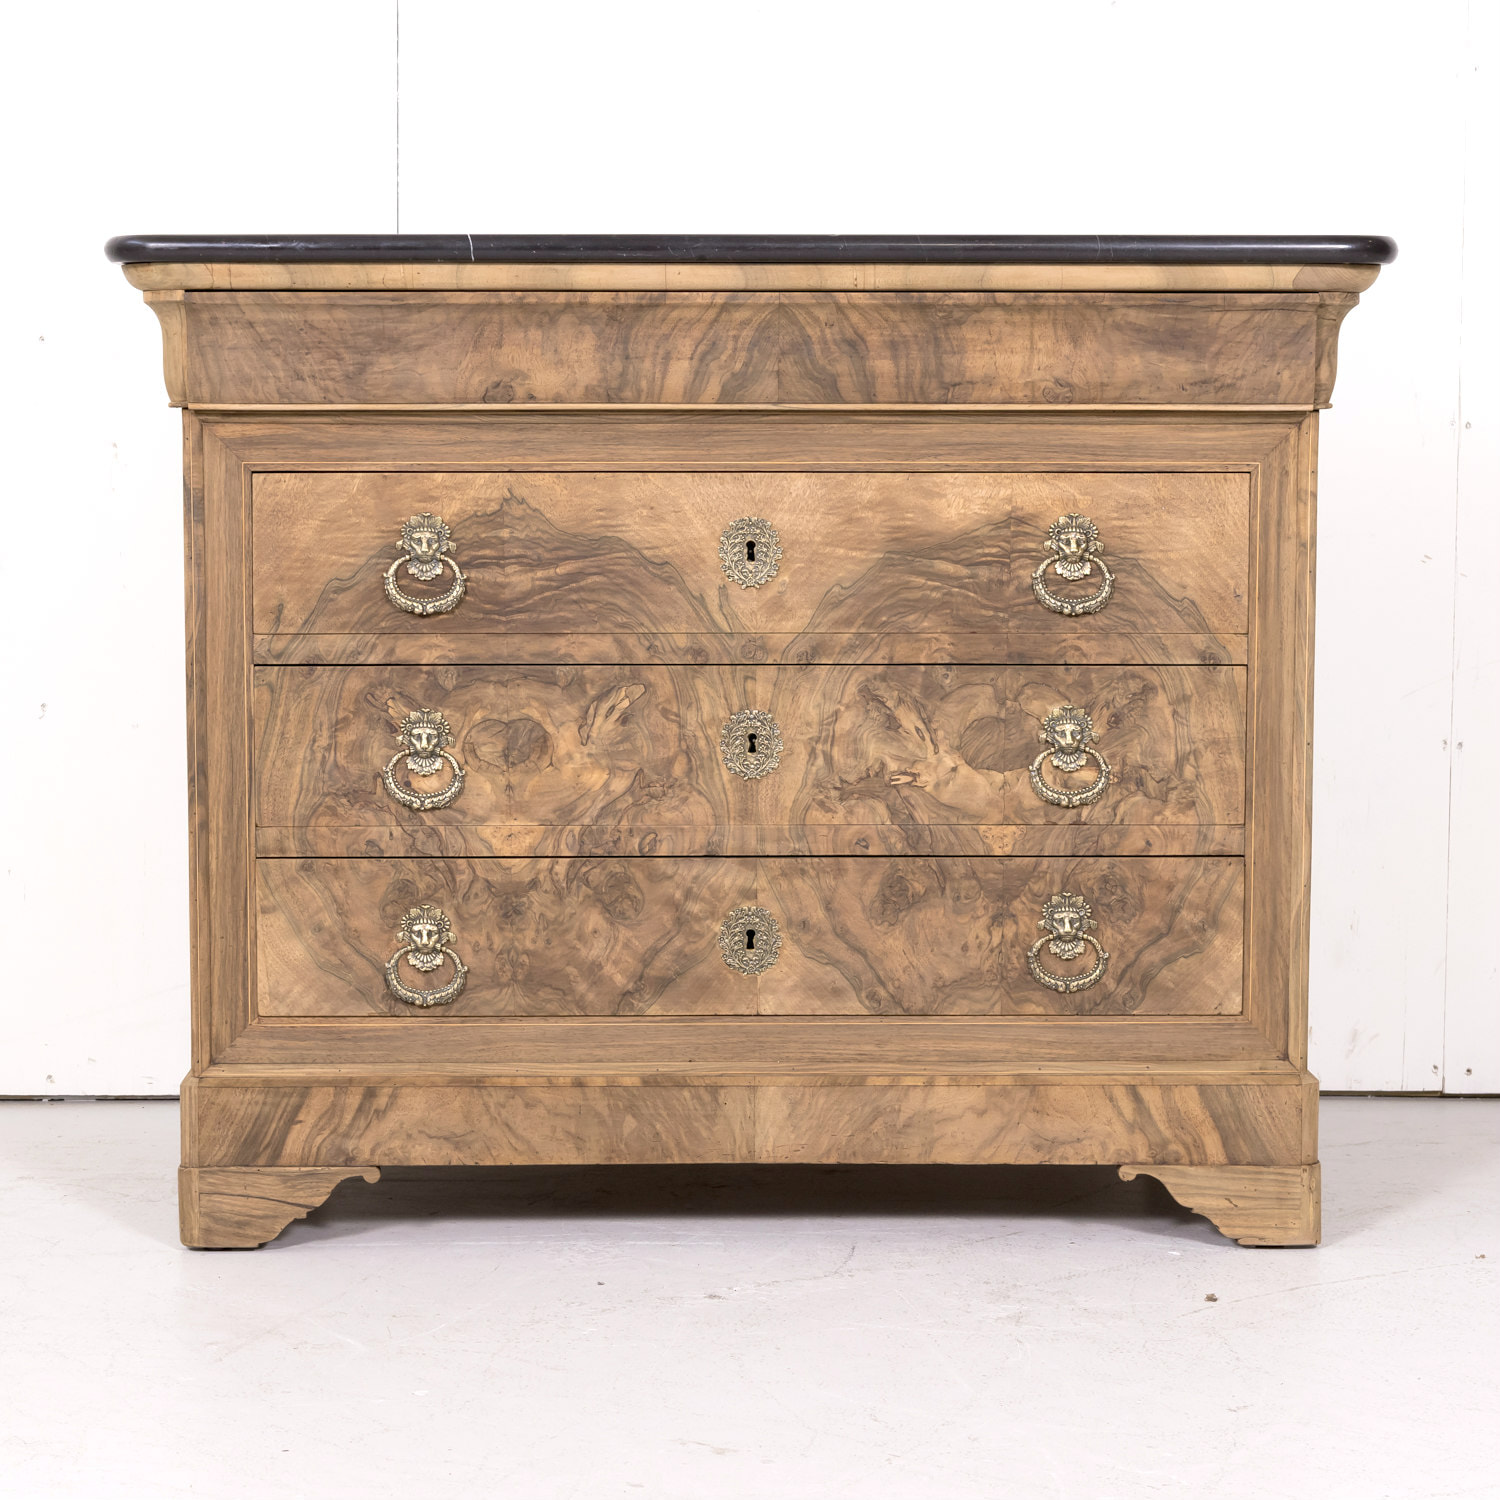 Superb 19th Century French Marble-Top Commode or Chest of Drawers